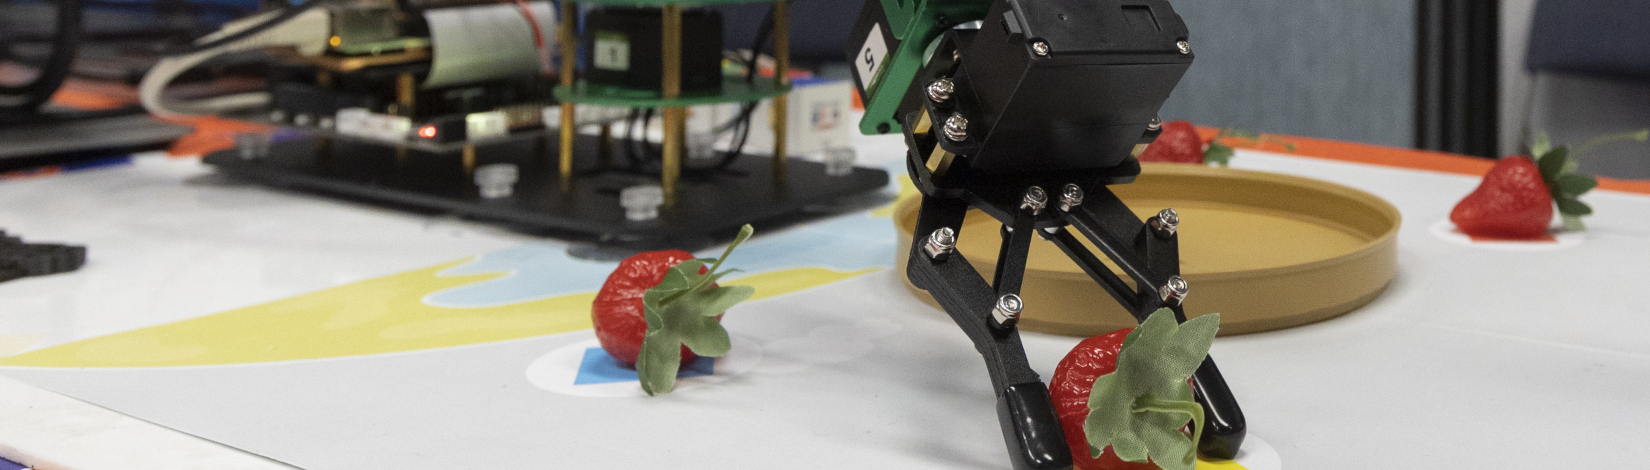 An image of an AI machine grasping a strawberry.